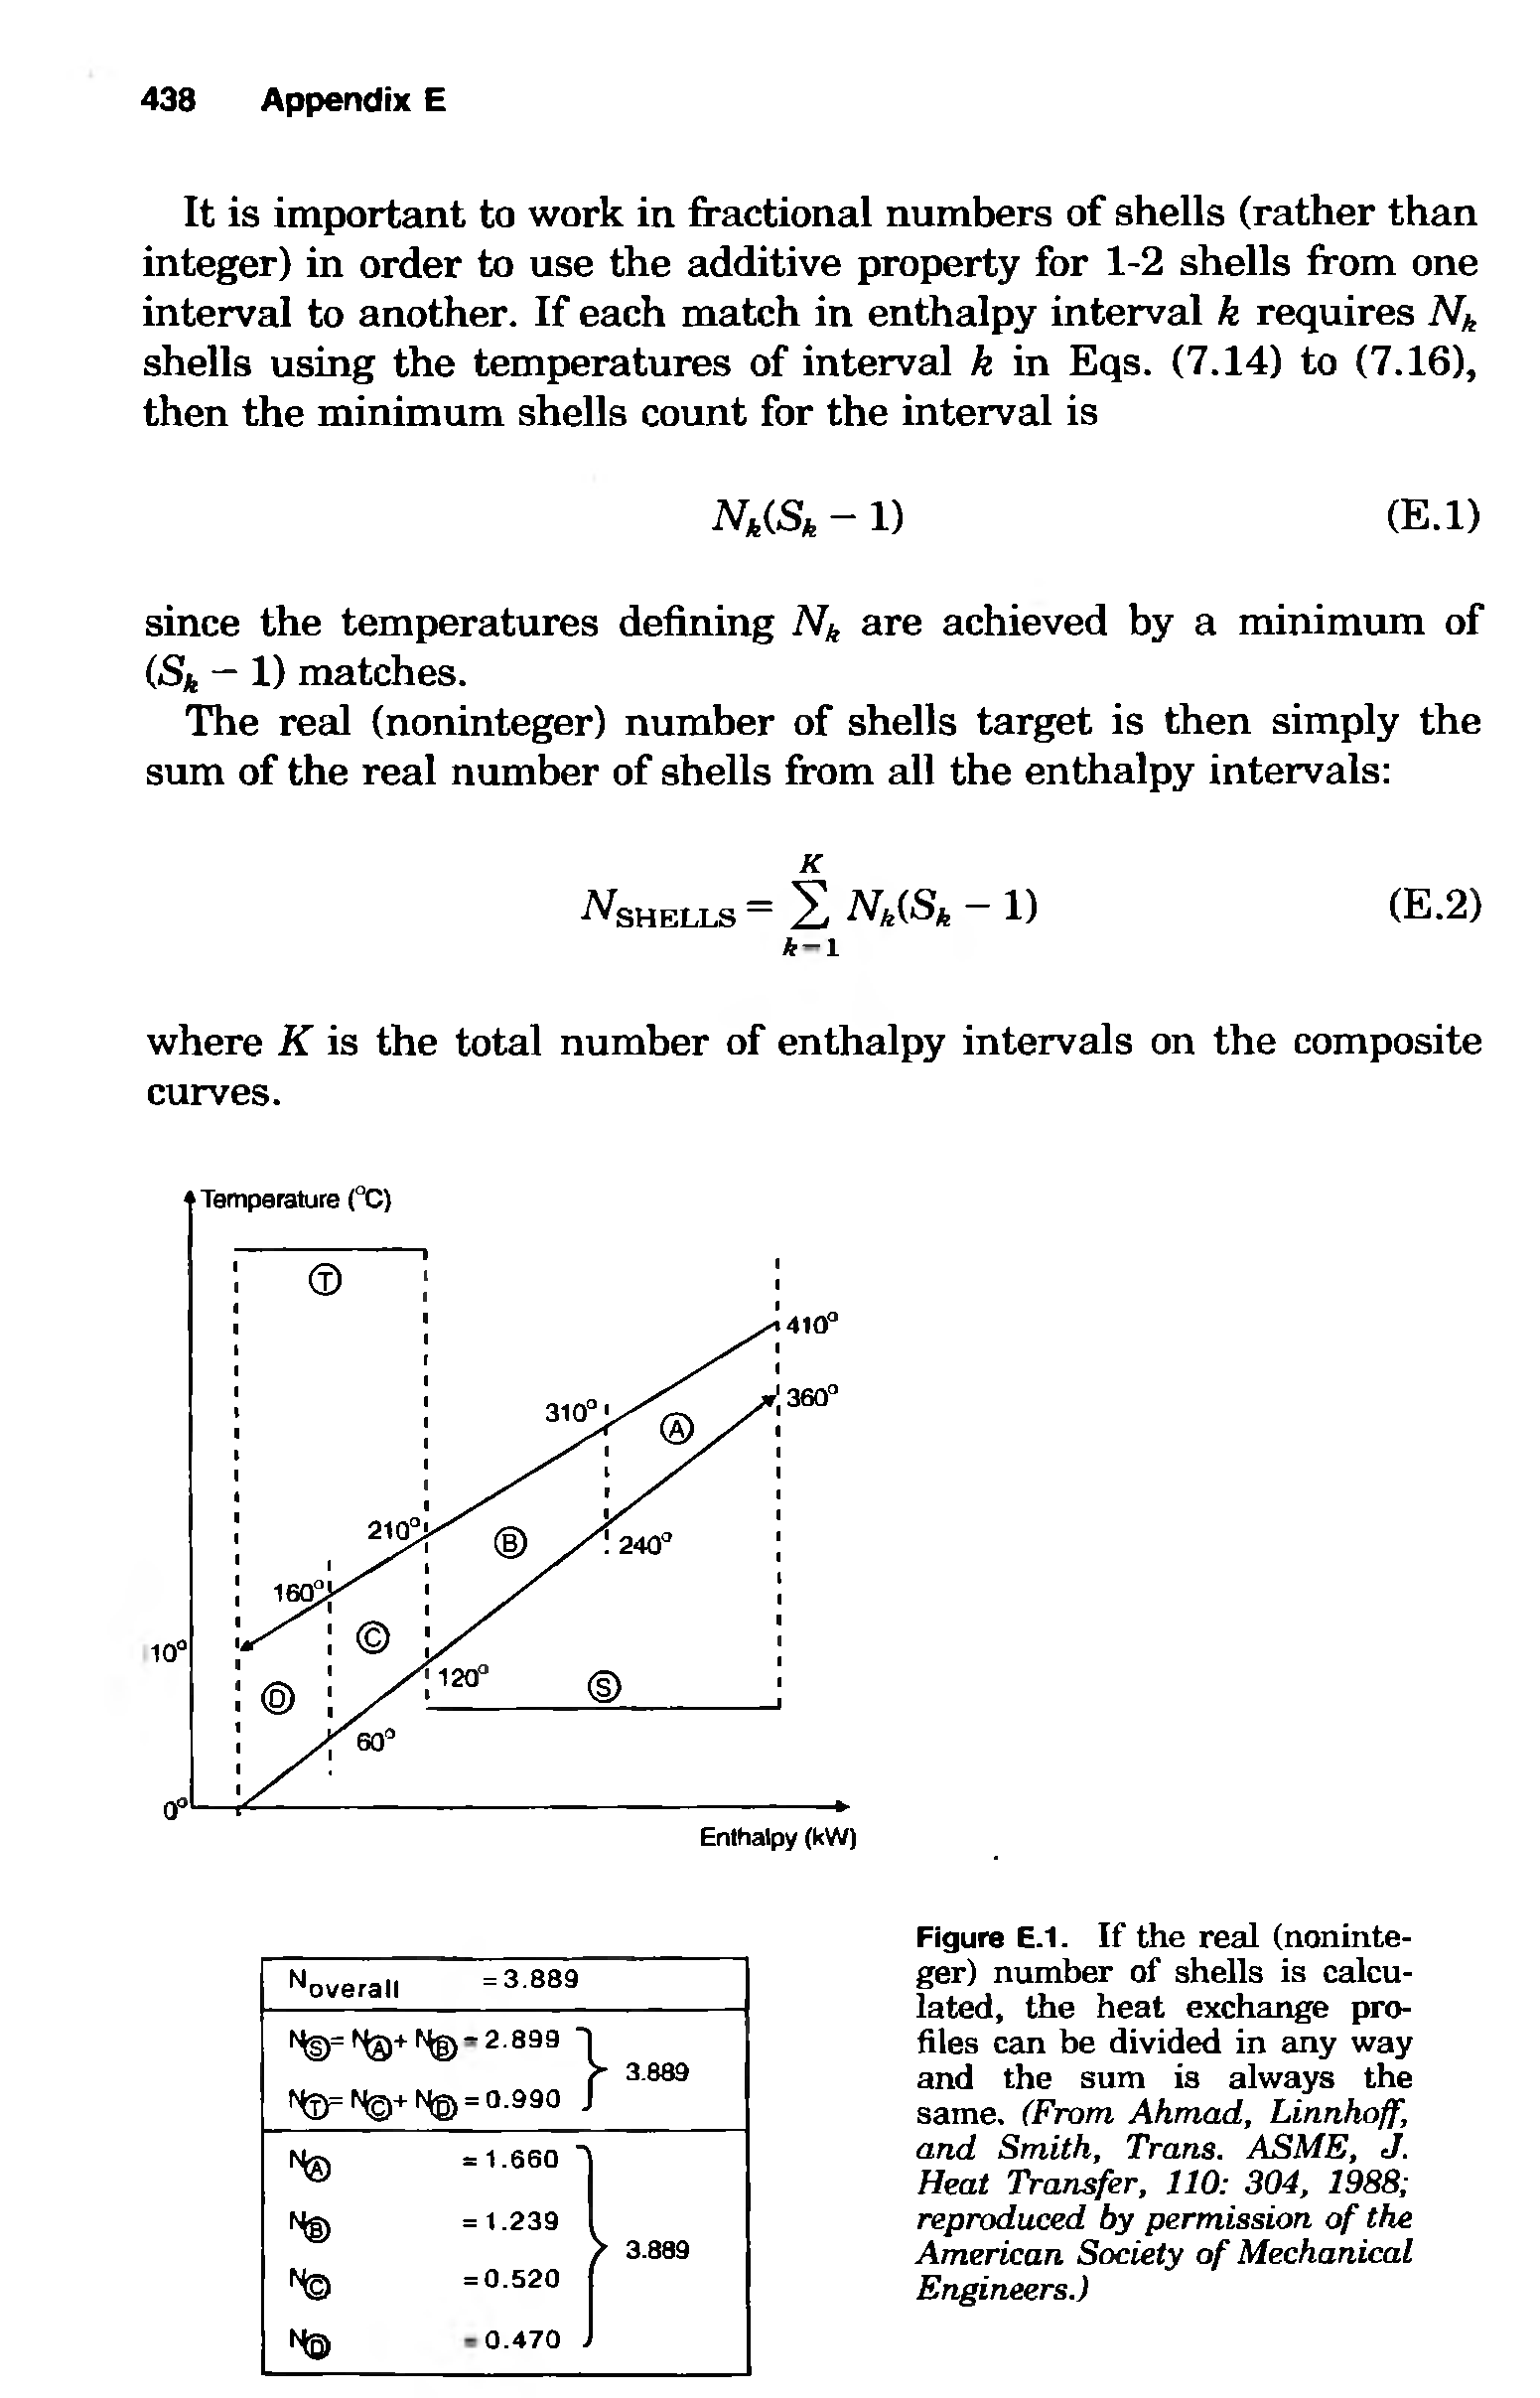 Figure E.l. If the real (noninteger) number of shells is calculated, the heat exchange profiles Ccm be divided in any way and the sum is always the same, (From Ahmad, Linnhoff, and Smith, Trans. ASME, J. Heat Transfer, 110 304, 1988 reproduced by permission of the American Society of Mechanical Engineers.)...